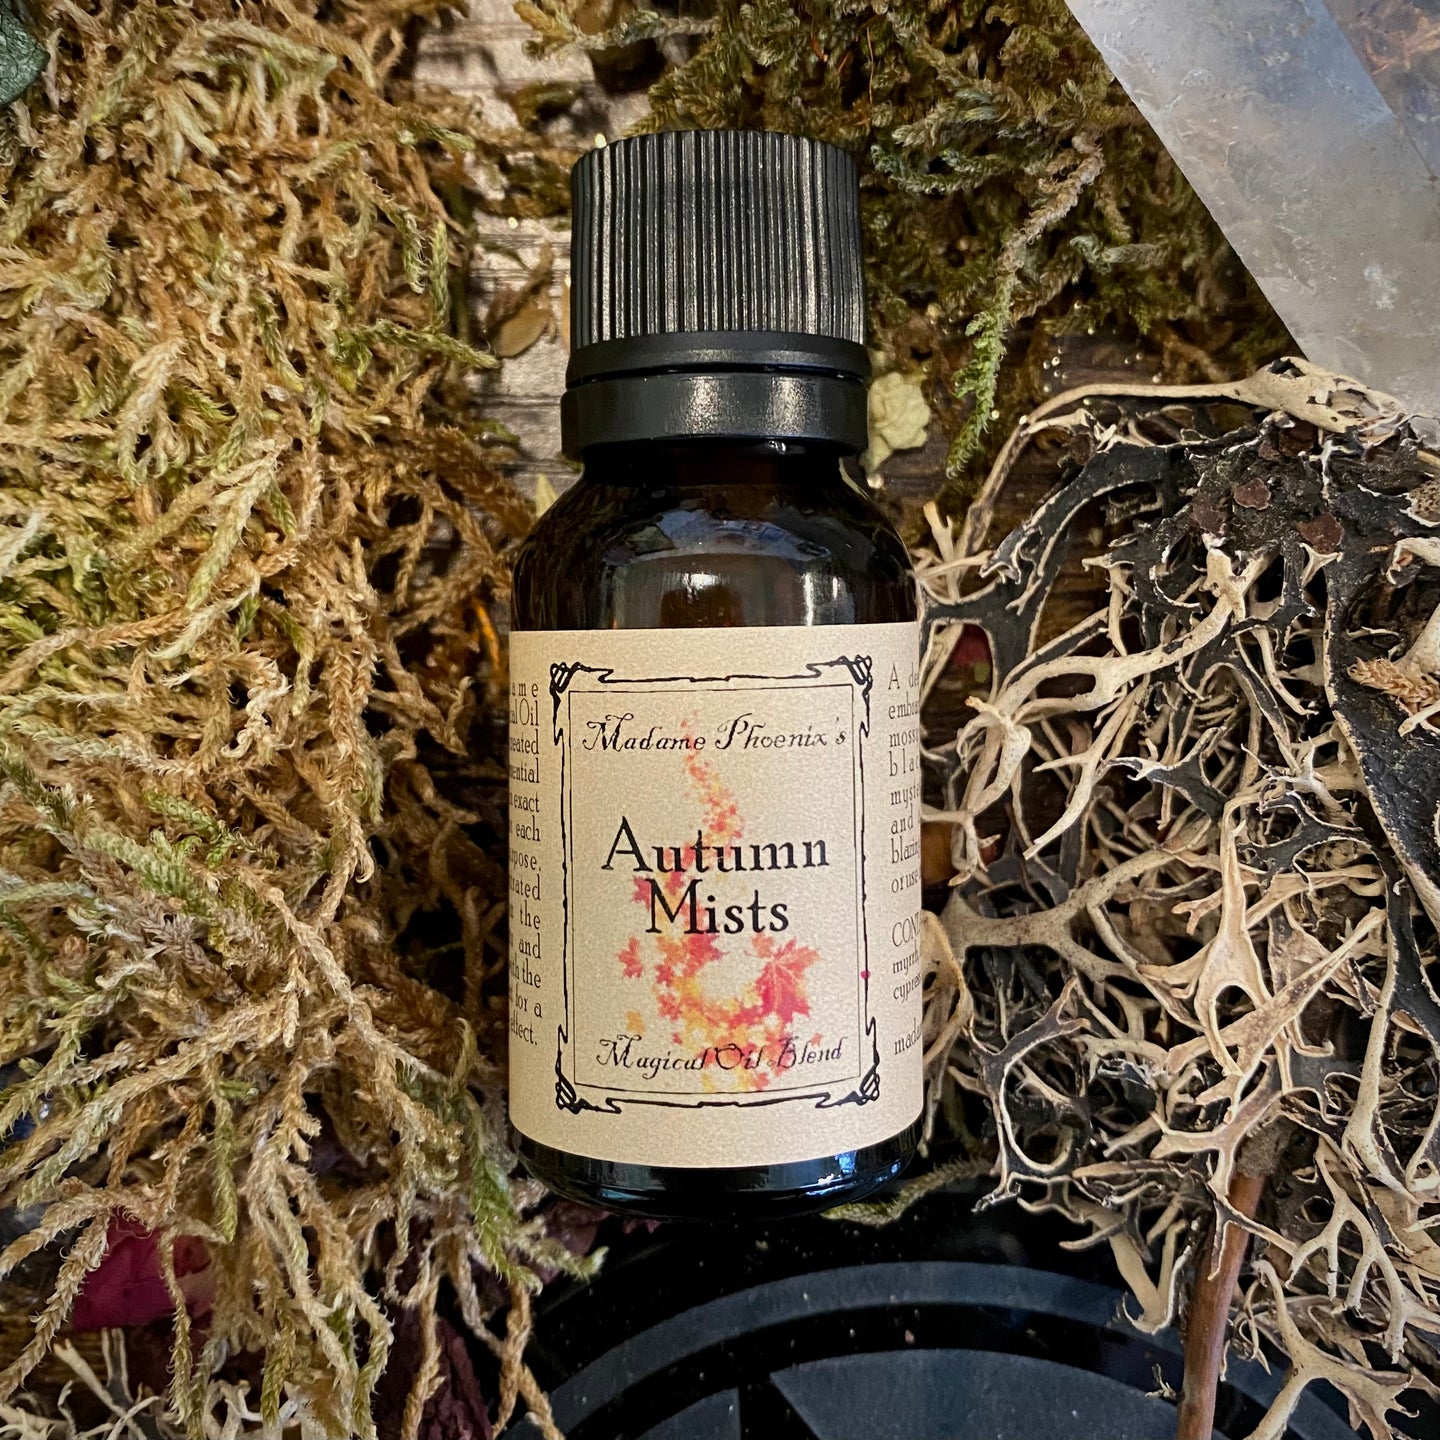 Autumn Mist: A Scented Seasonal Oil Blend for Diffuser, Bath or Body